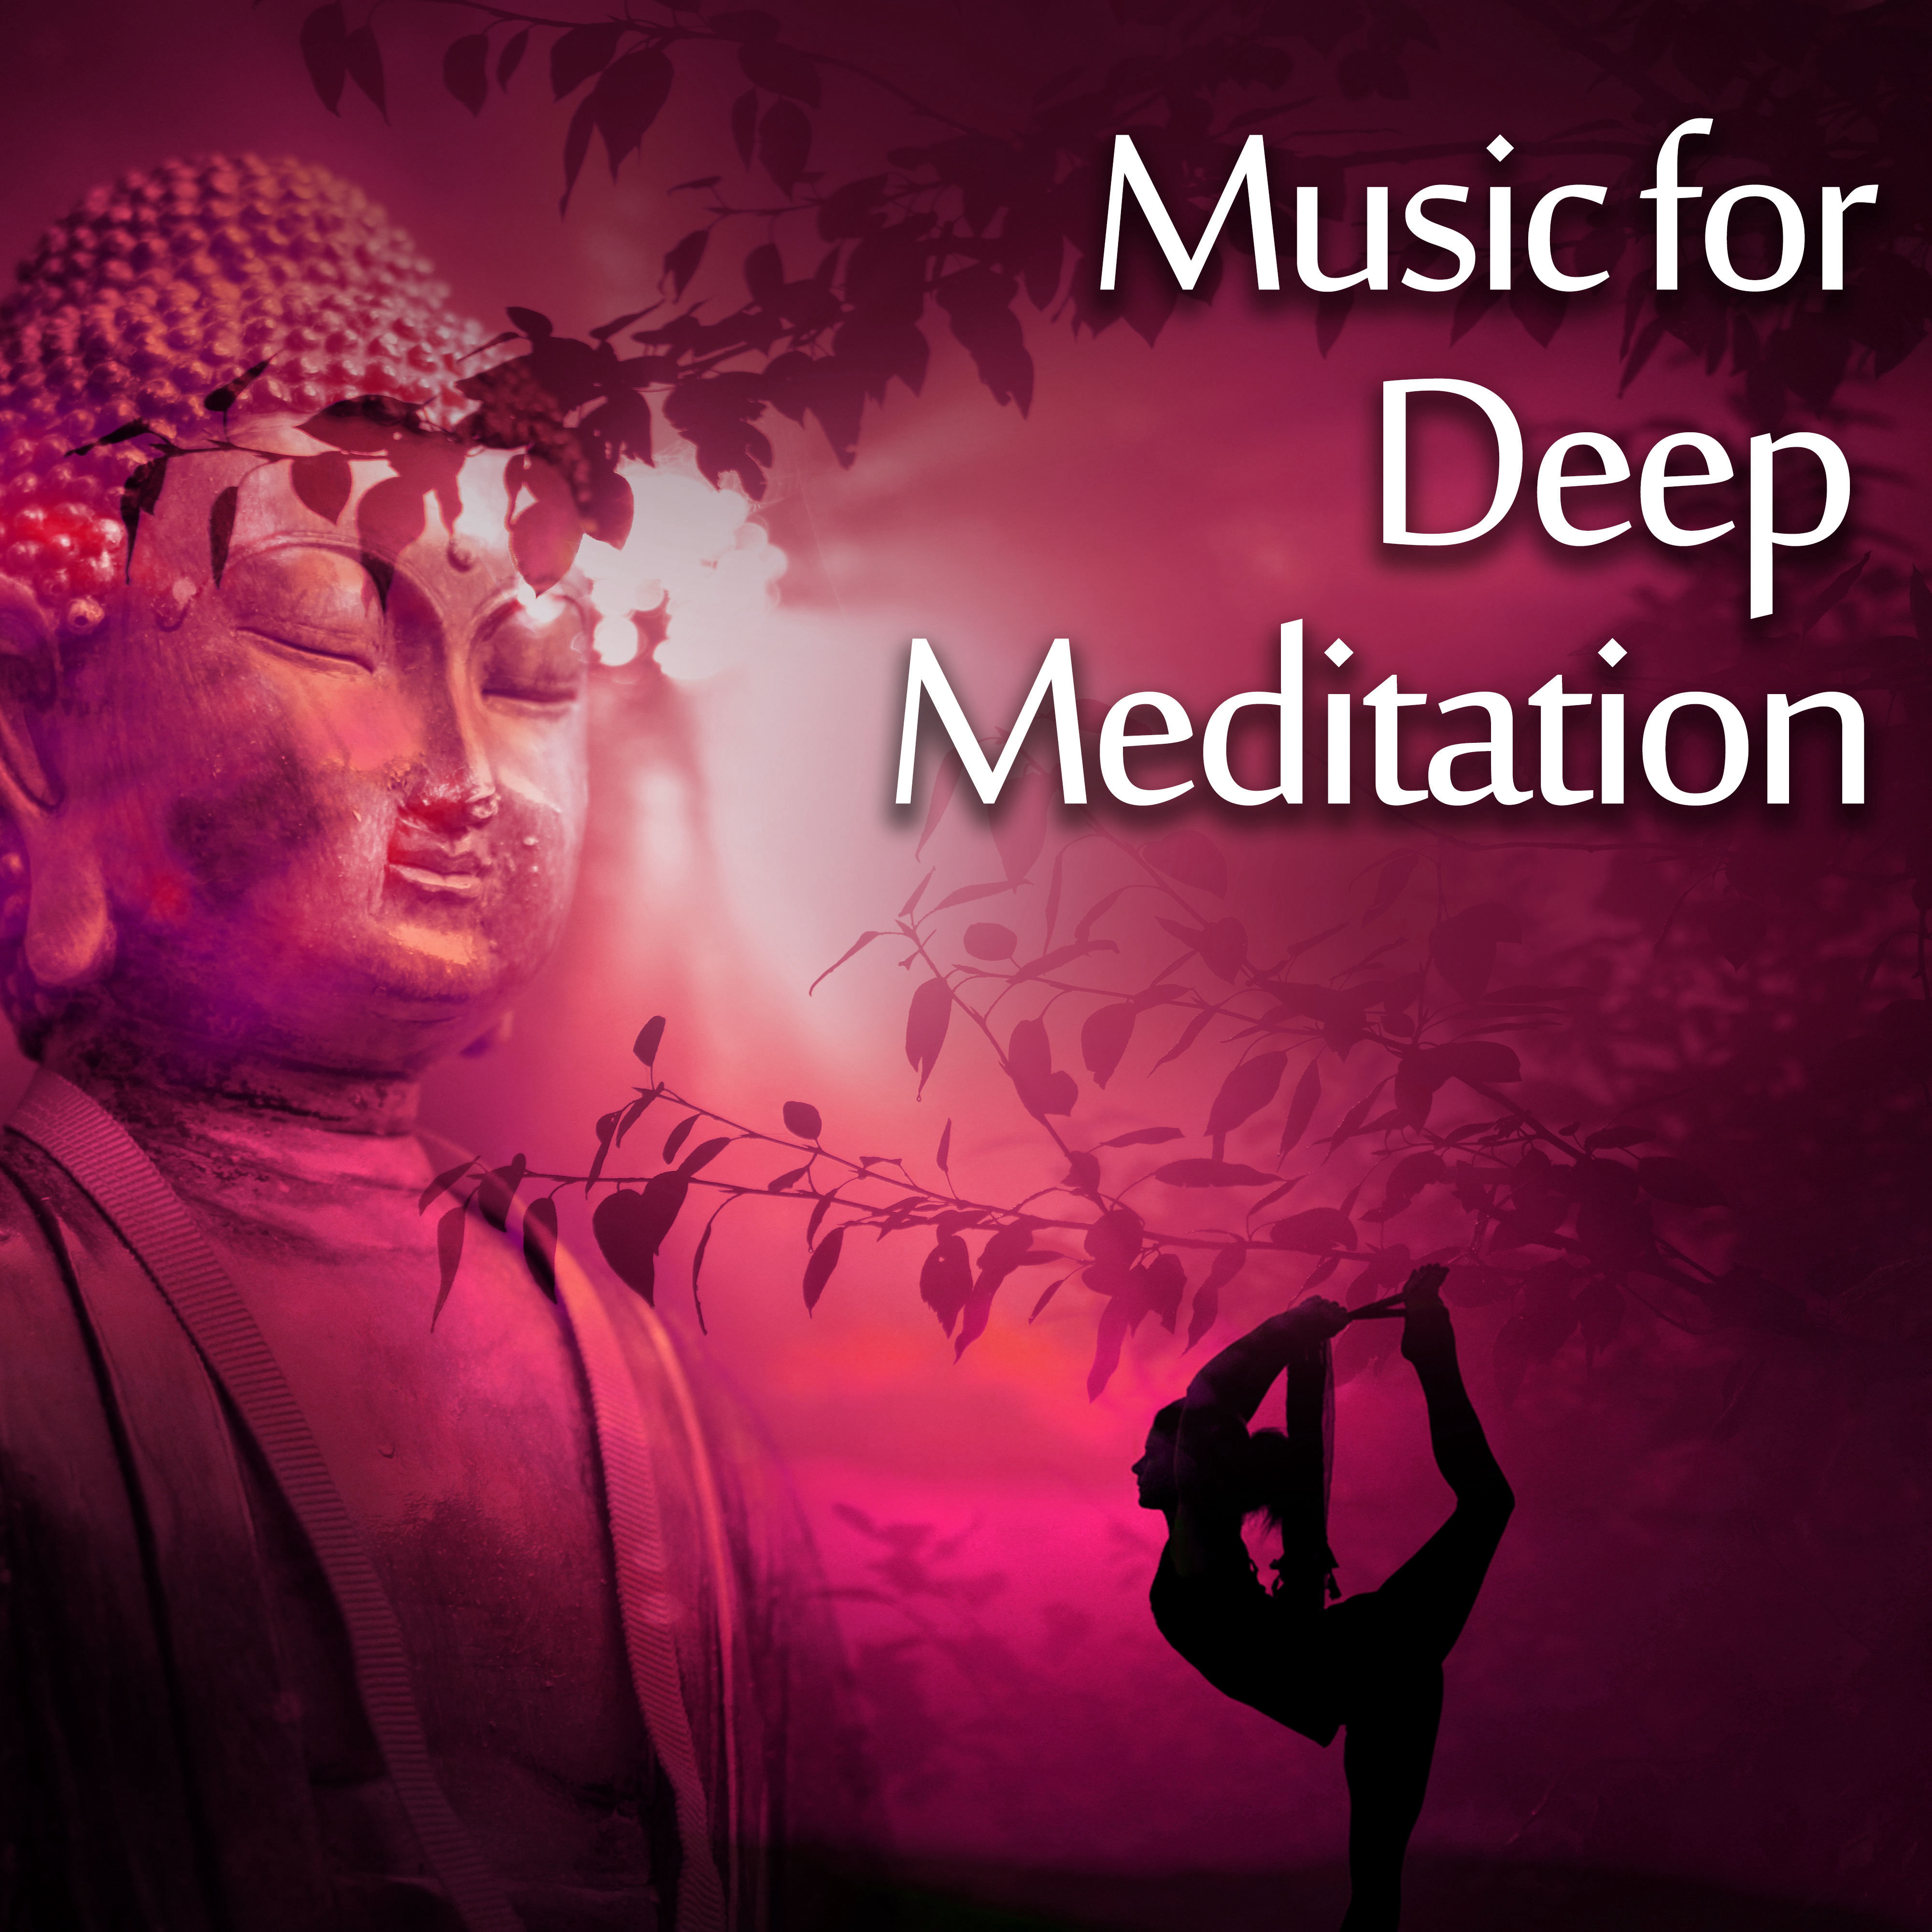 Music for Deep Meditation – Spiritual Nature Sounds, Tibetan Background Melodies, Music for Yoga, Mindfulness Training, Relaxation